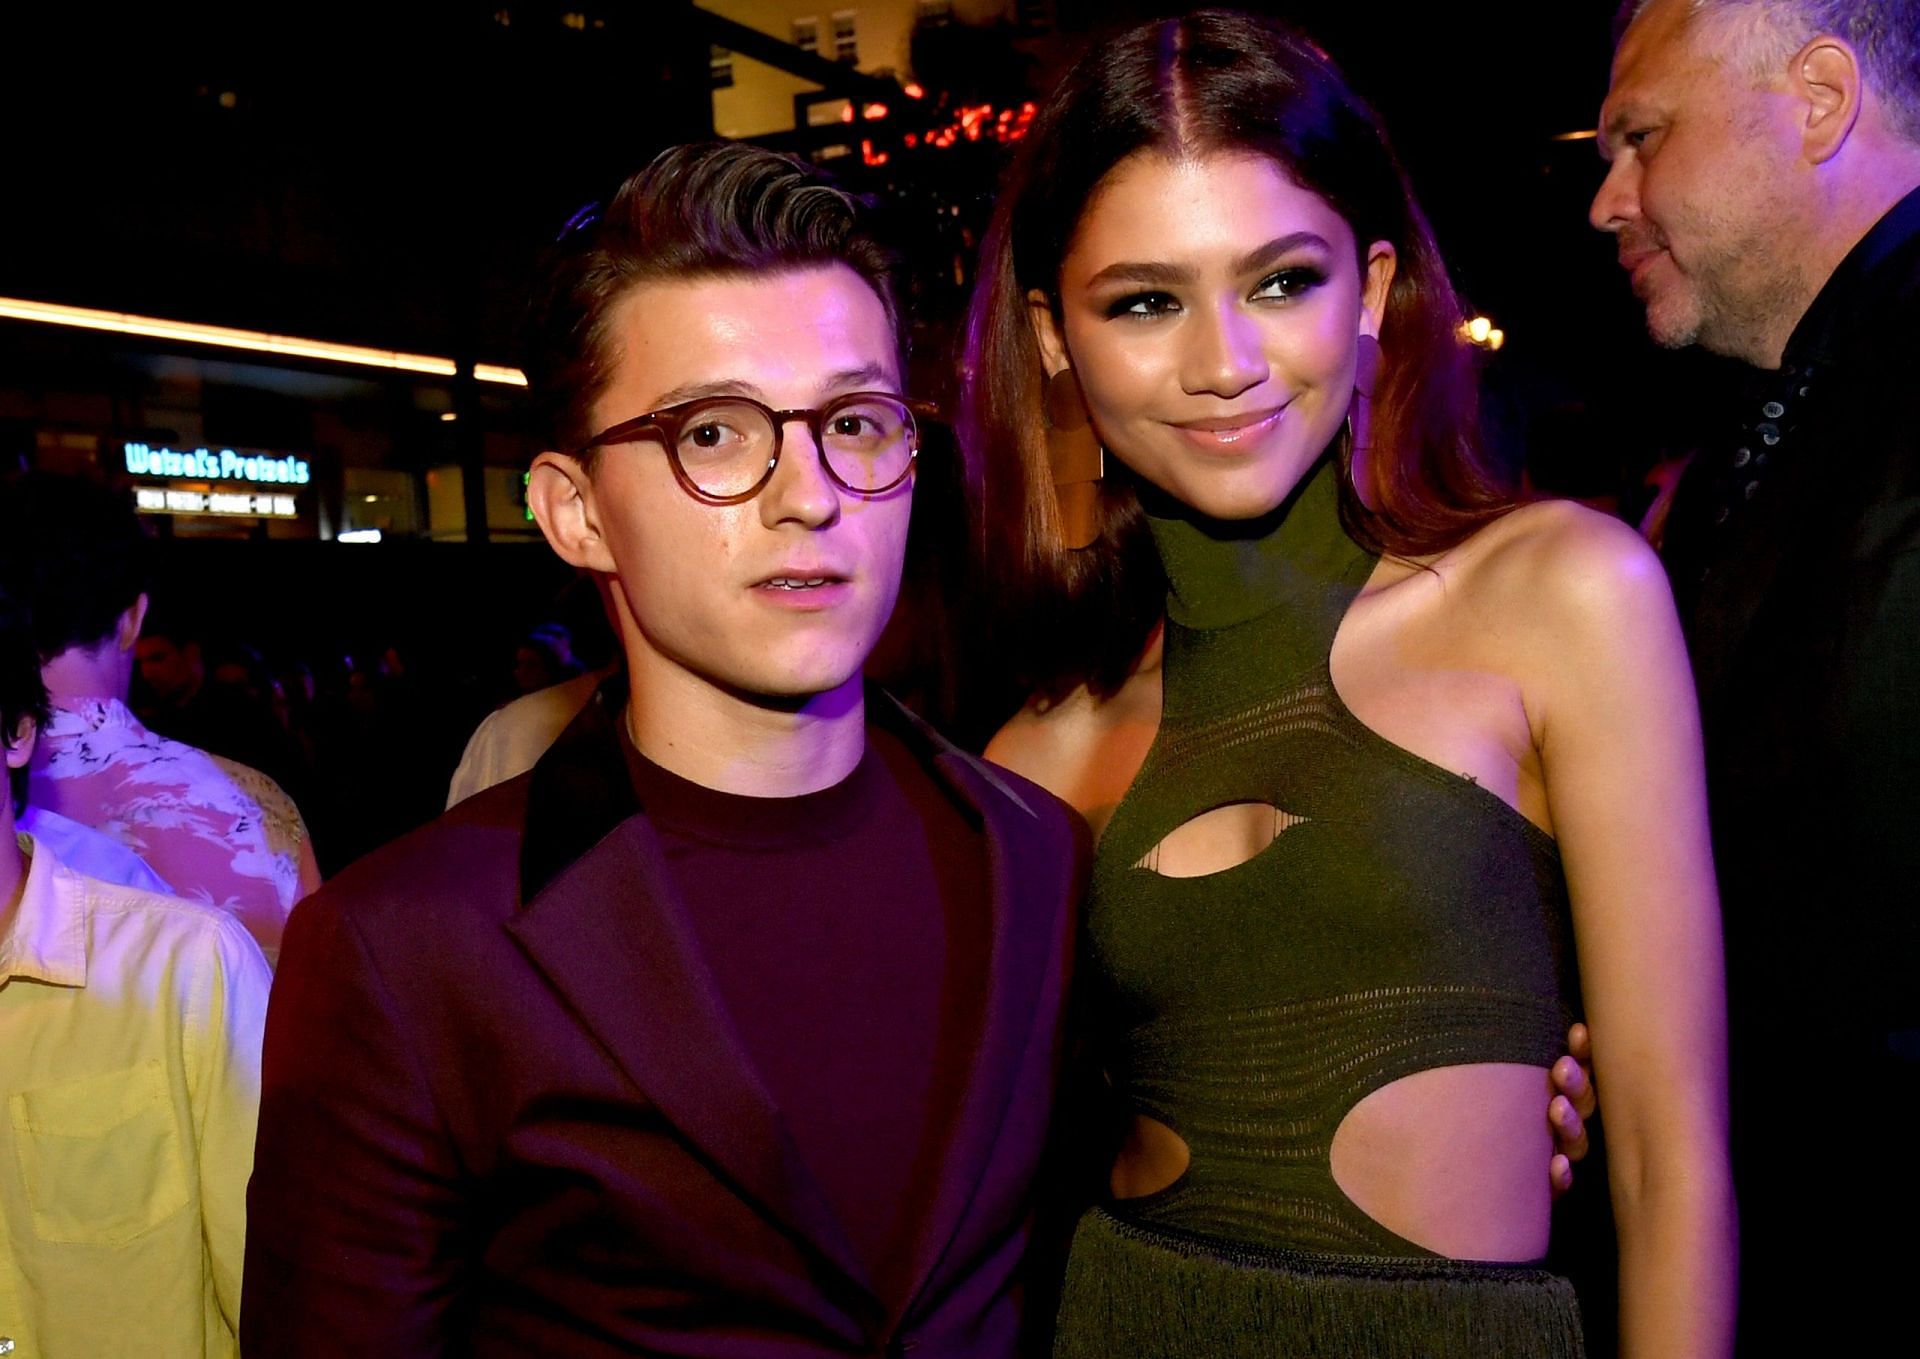 Engagement rumors about Tom Holland and Zendaya abound (image via Getty Images)